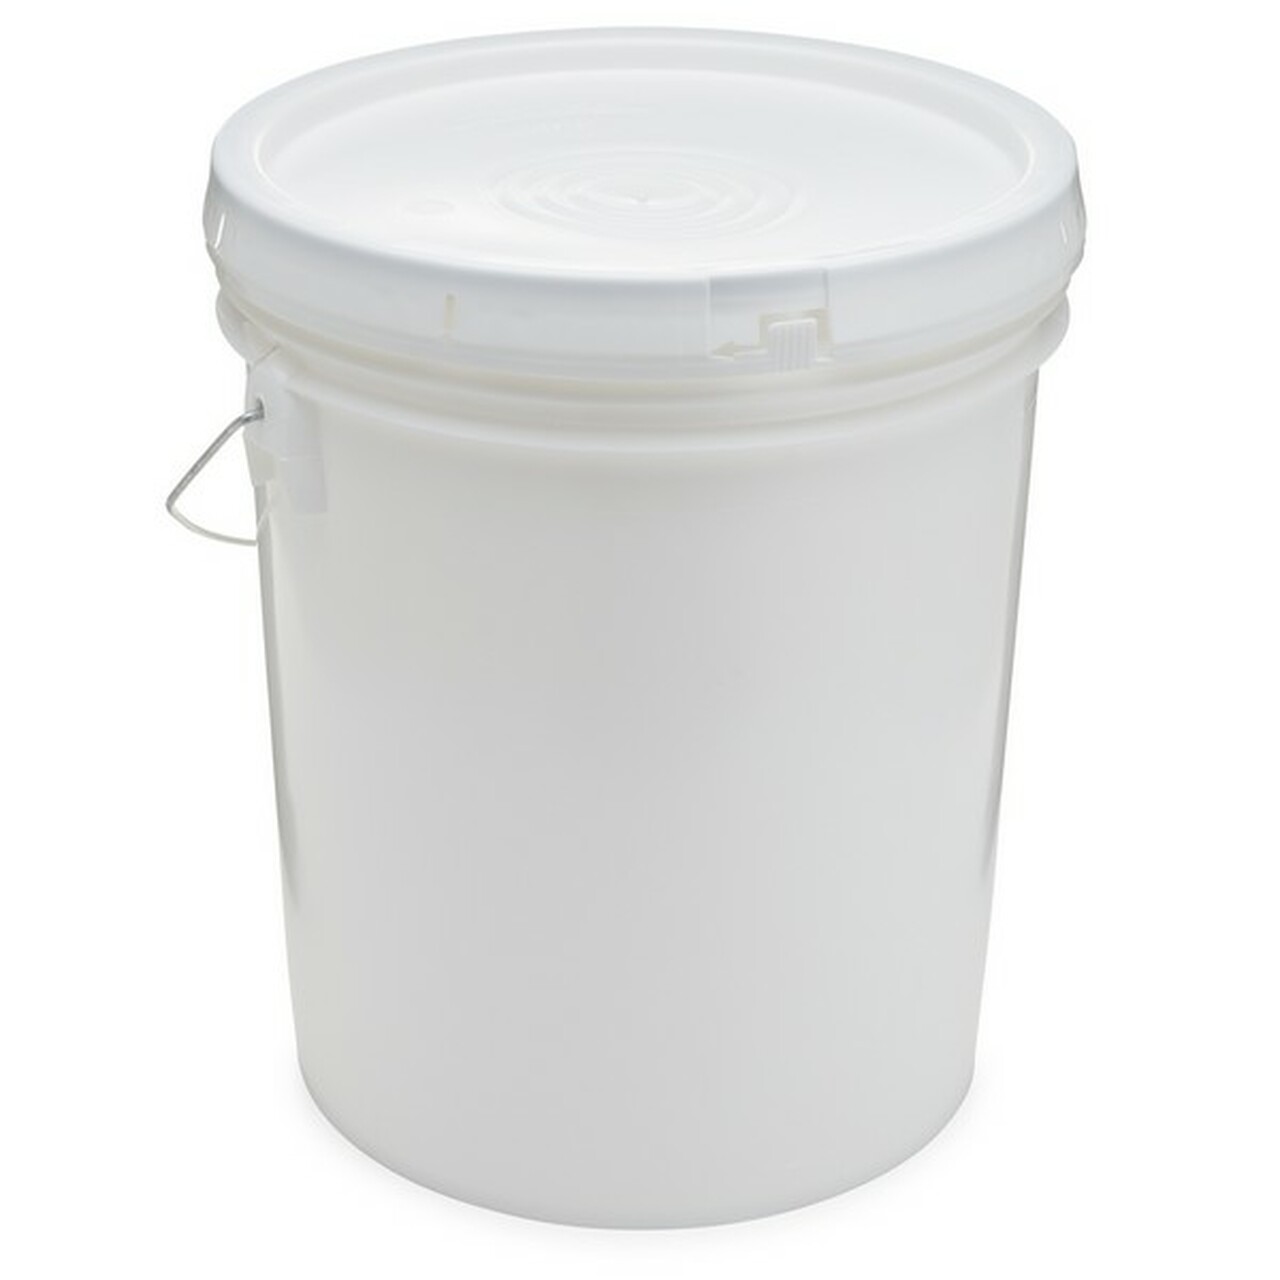 5 Gallon Plastic Pail - Workplace Safety